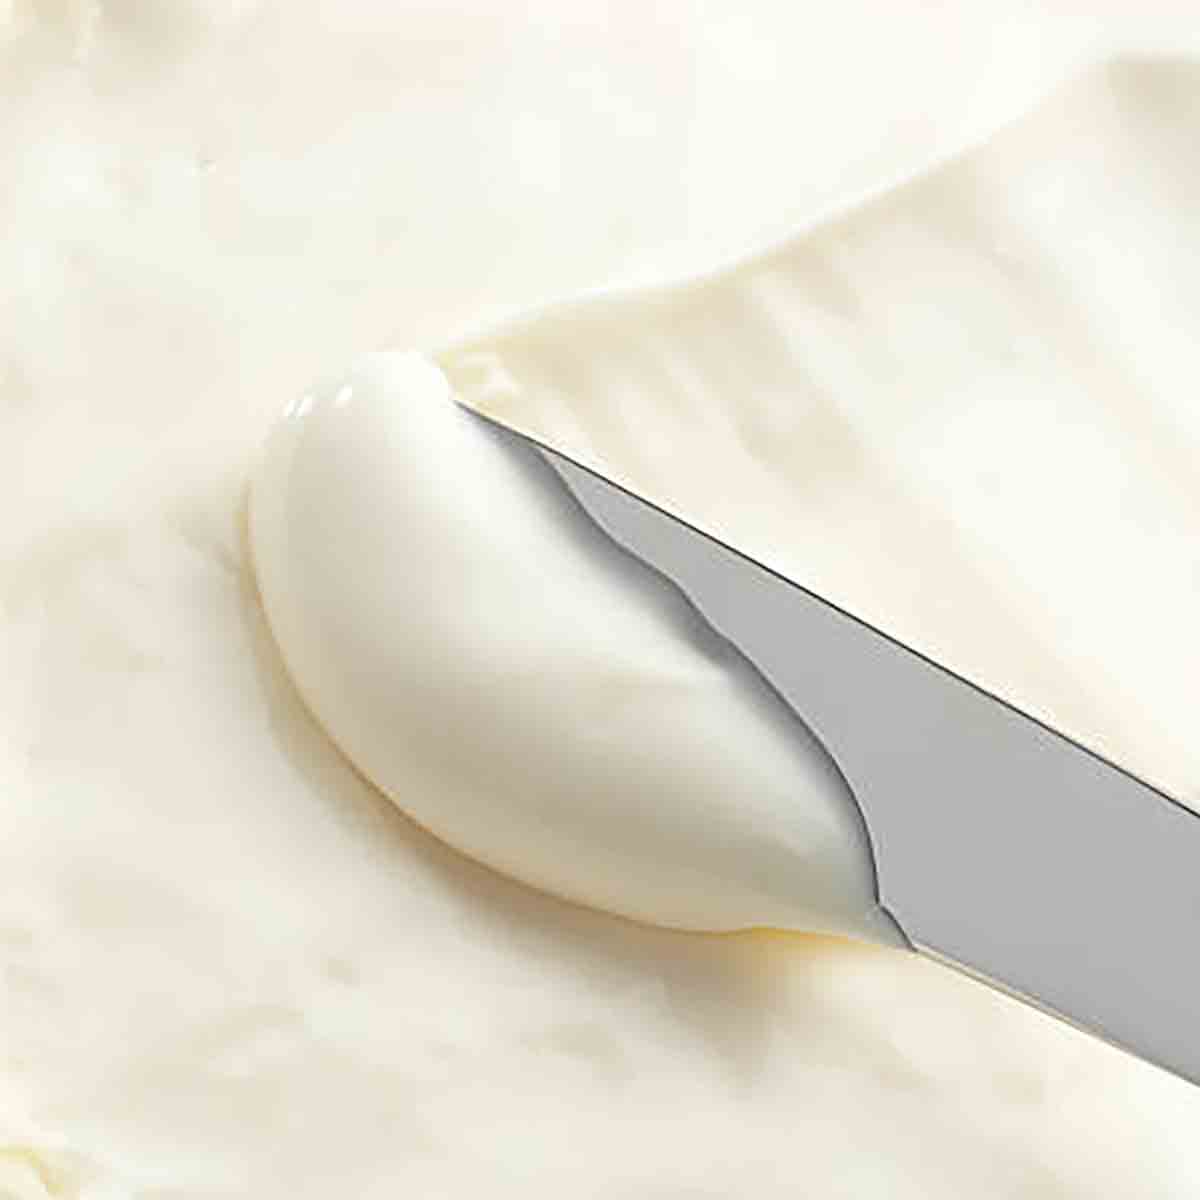 Vegan Cream Cheese Being Spread With A Knife